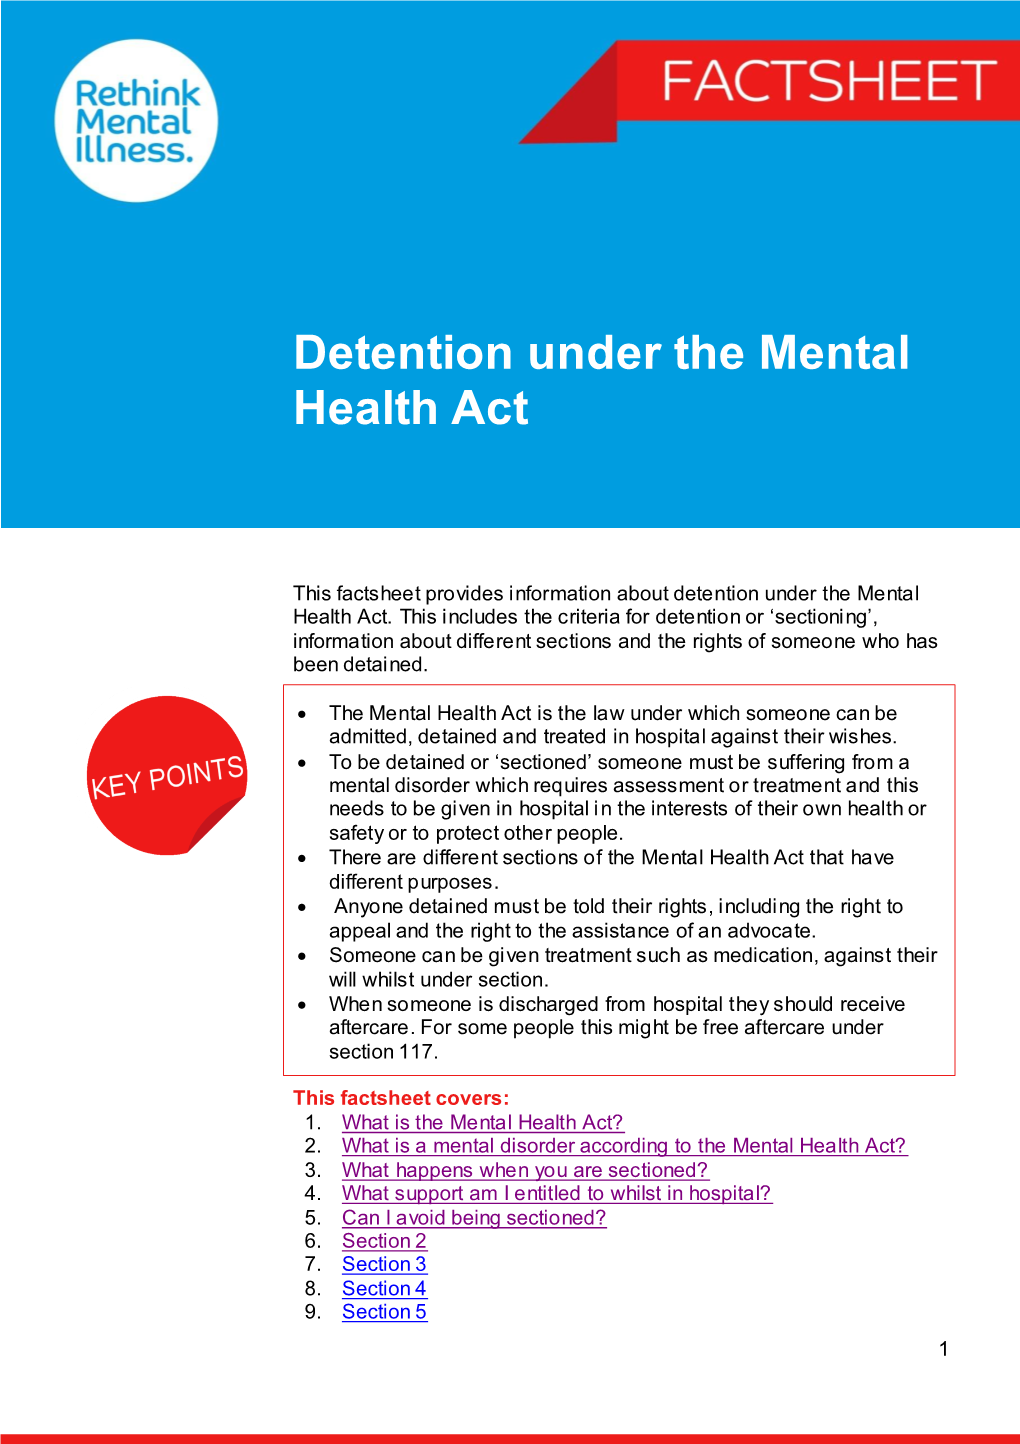 Detention Under the Mental Health Act